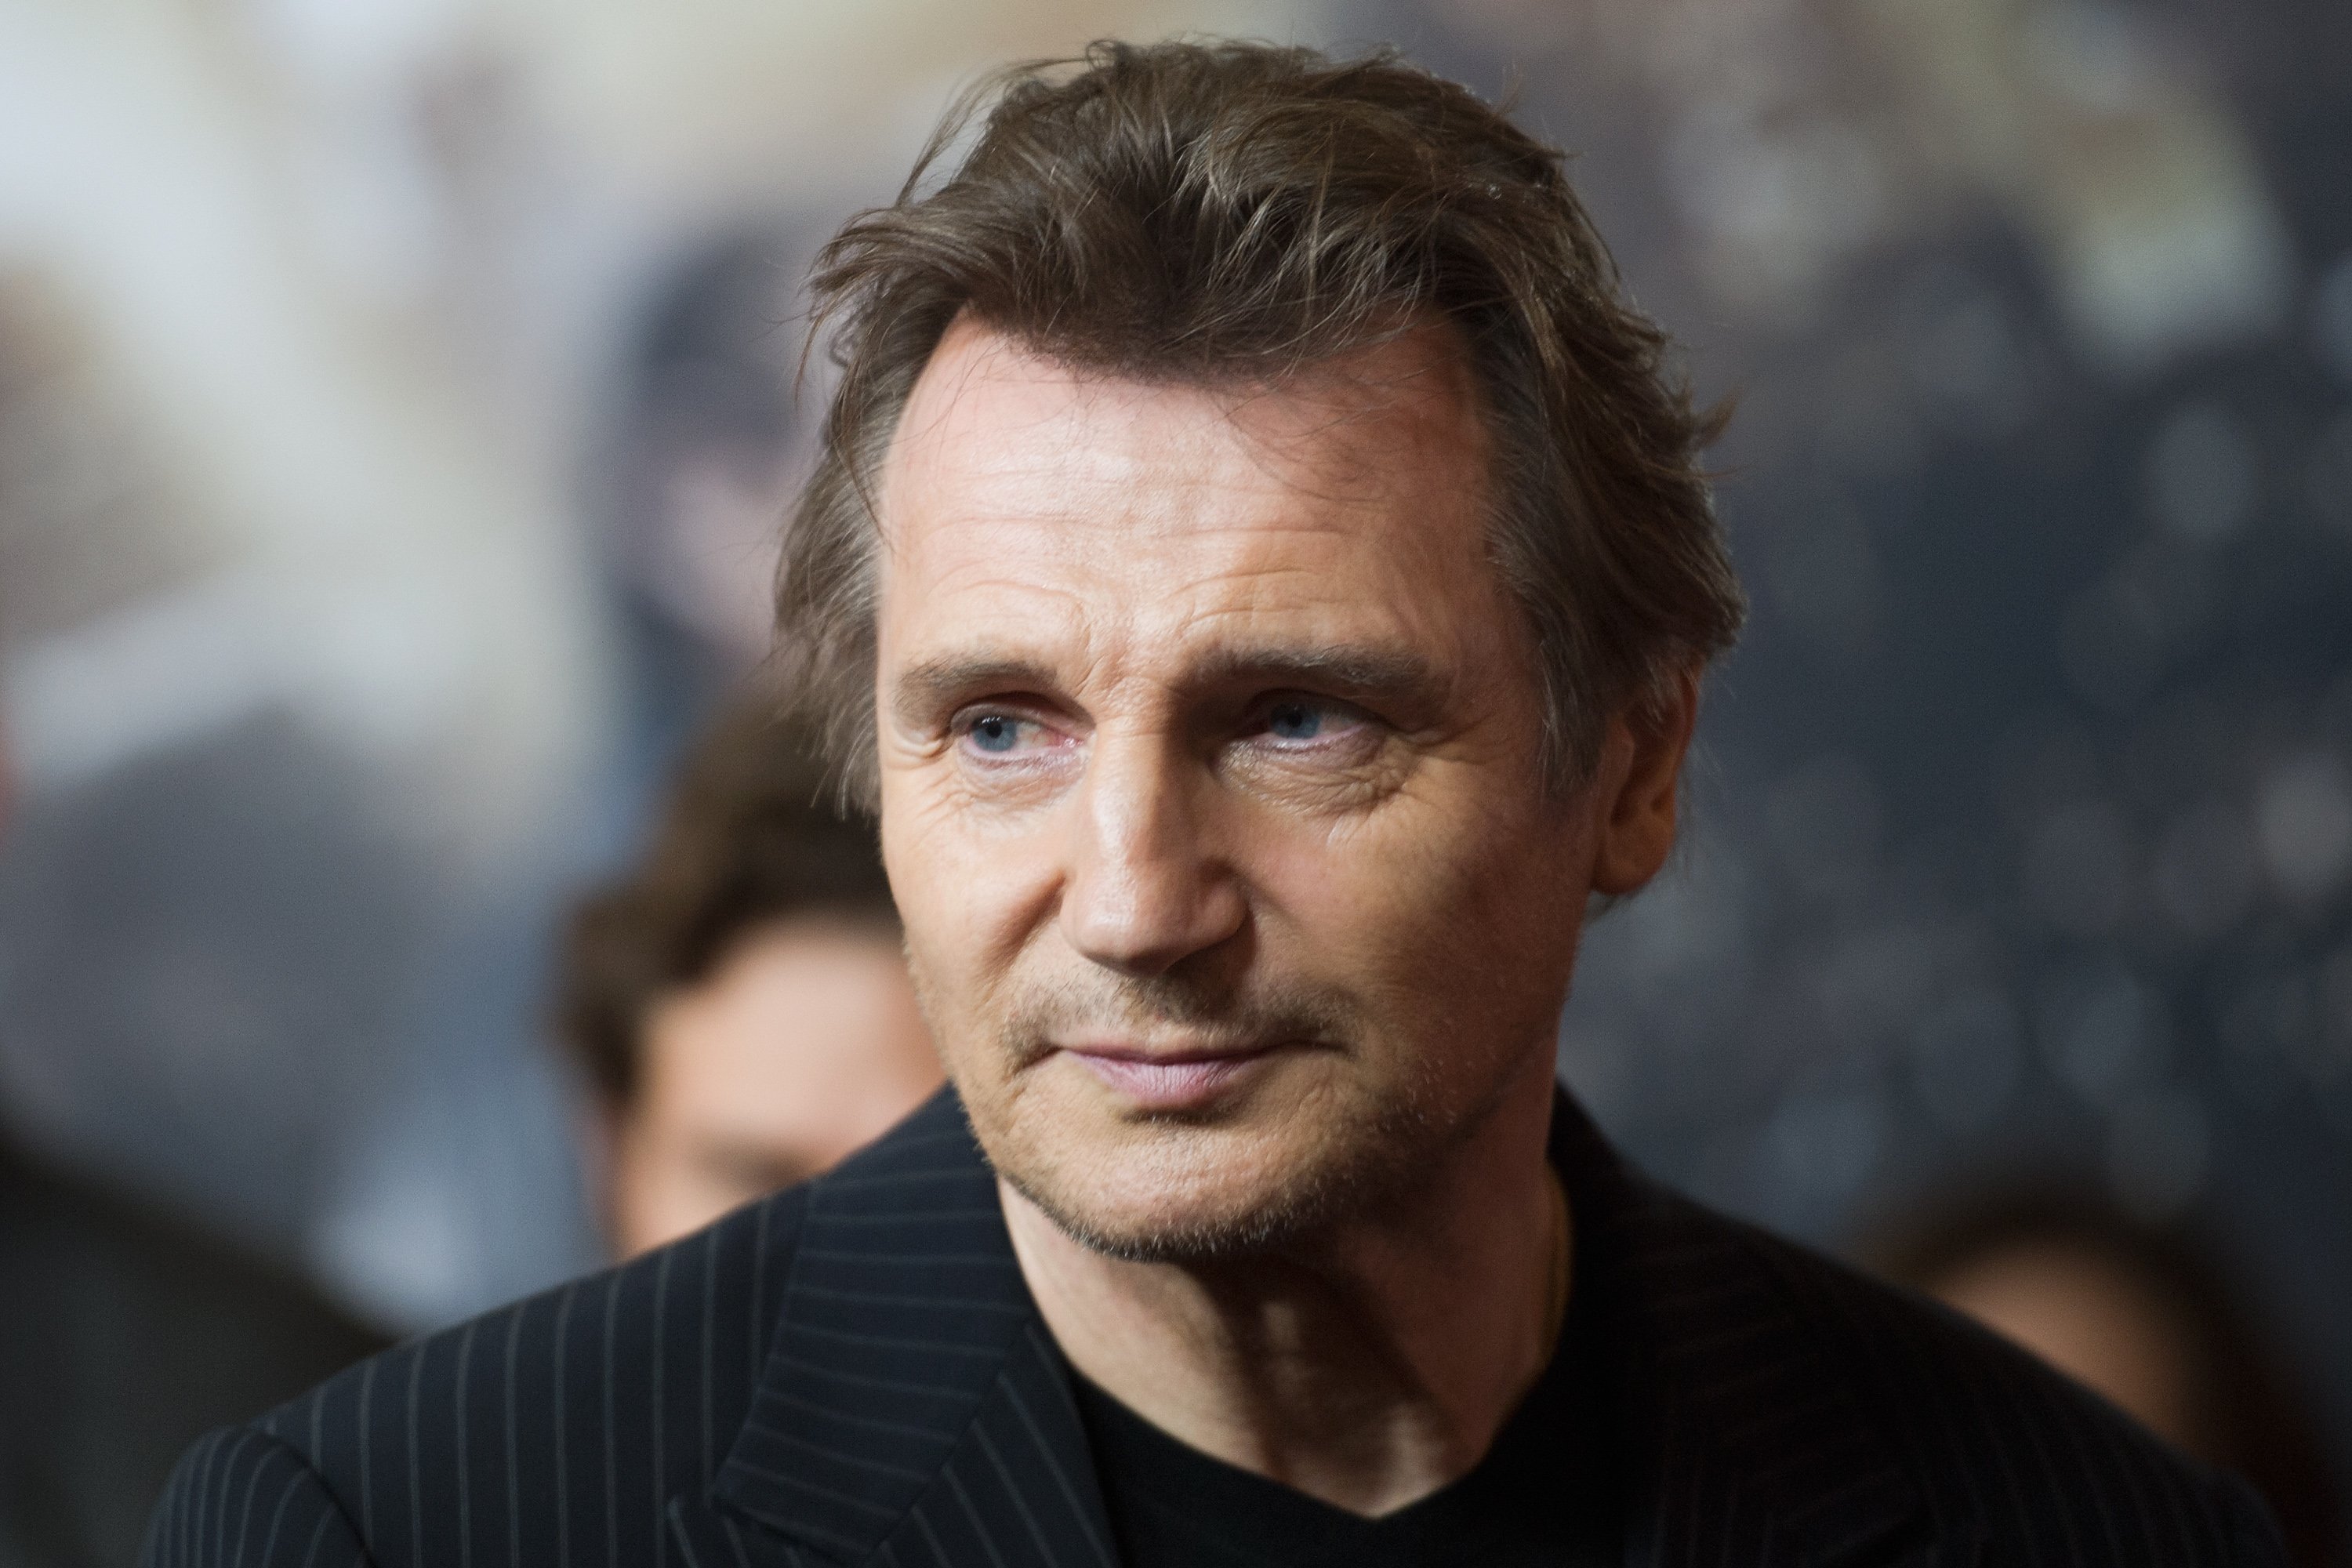 Liam Neeson attends the premiere of the film '96 Hours - Taken 3' at Zoo Palast on December 16, 2014 in Berlin, Germany. | Source: Getty Images